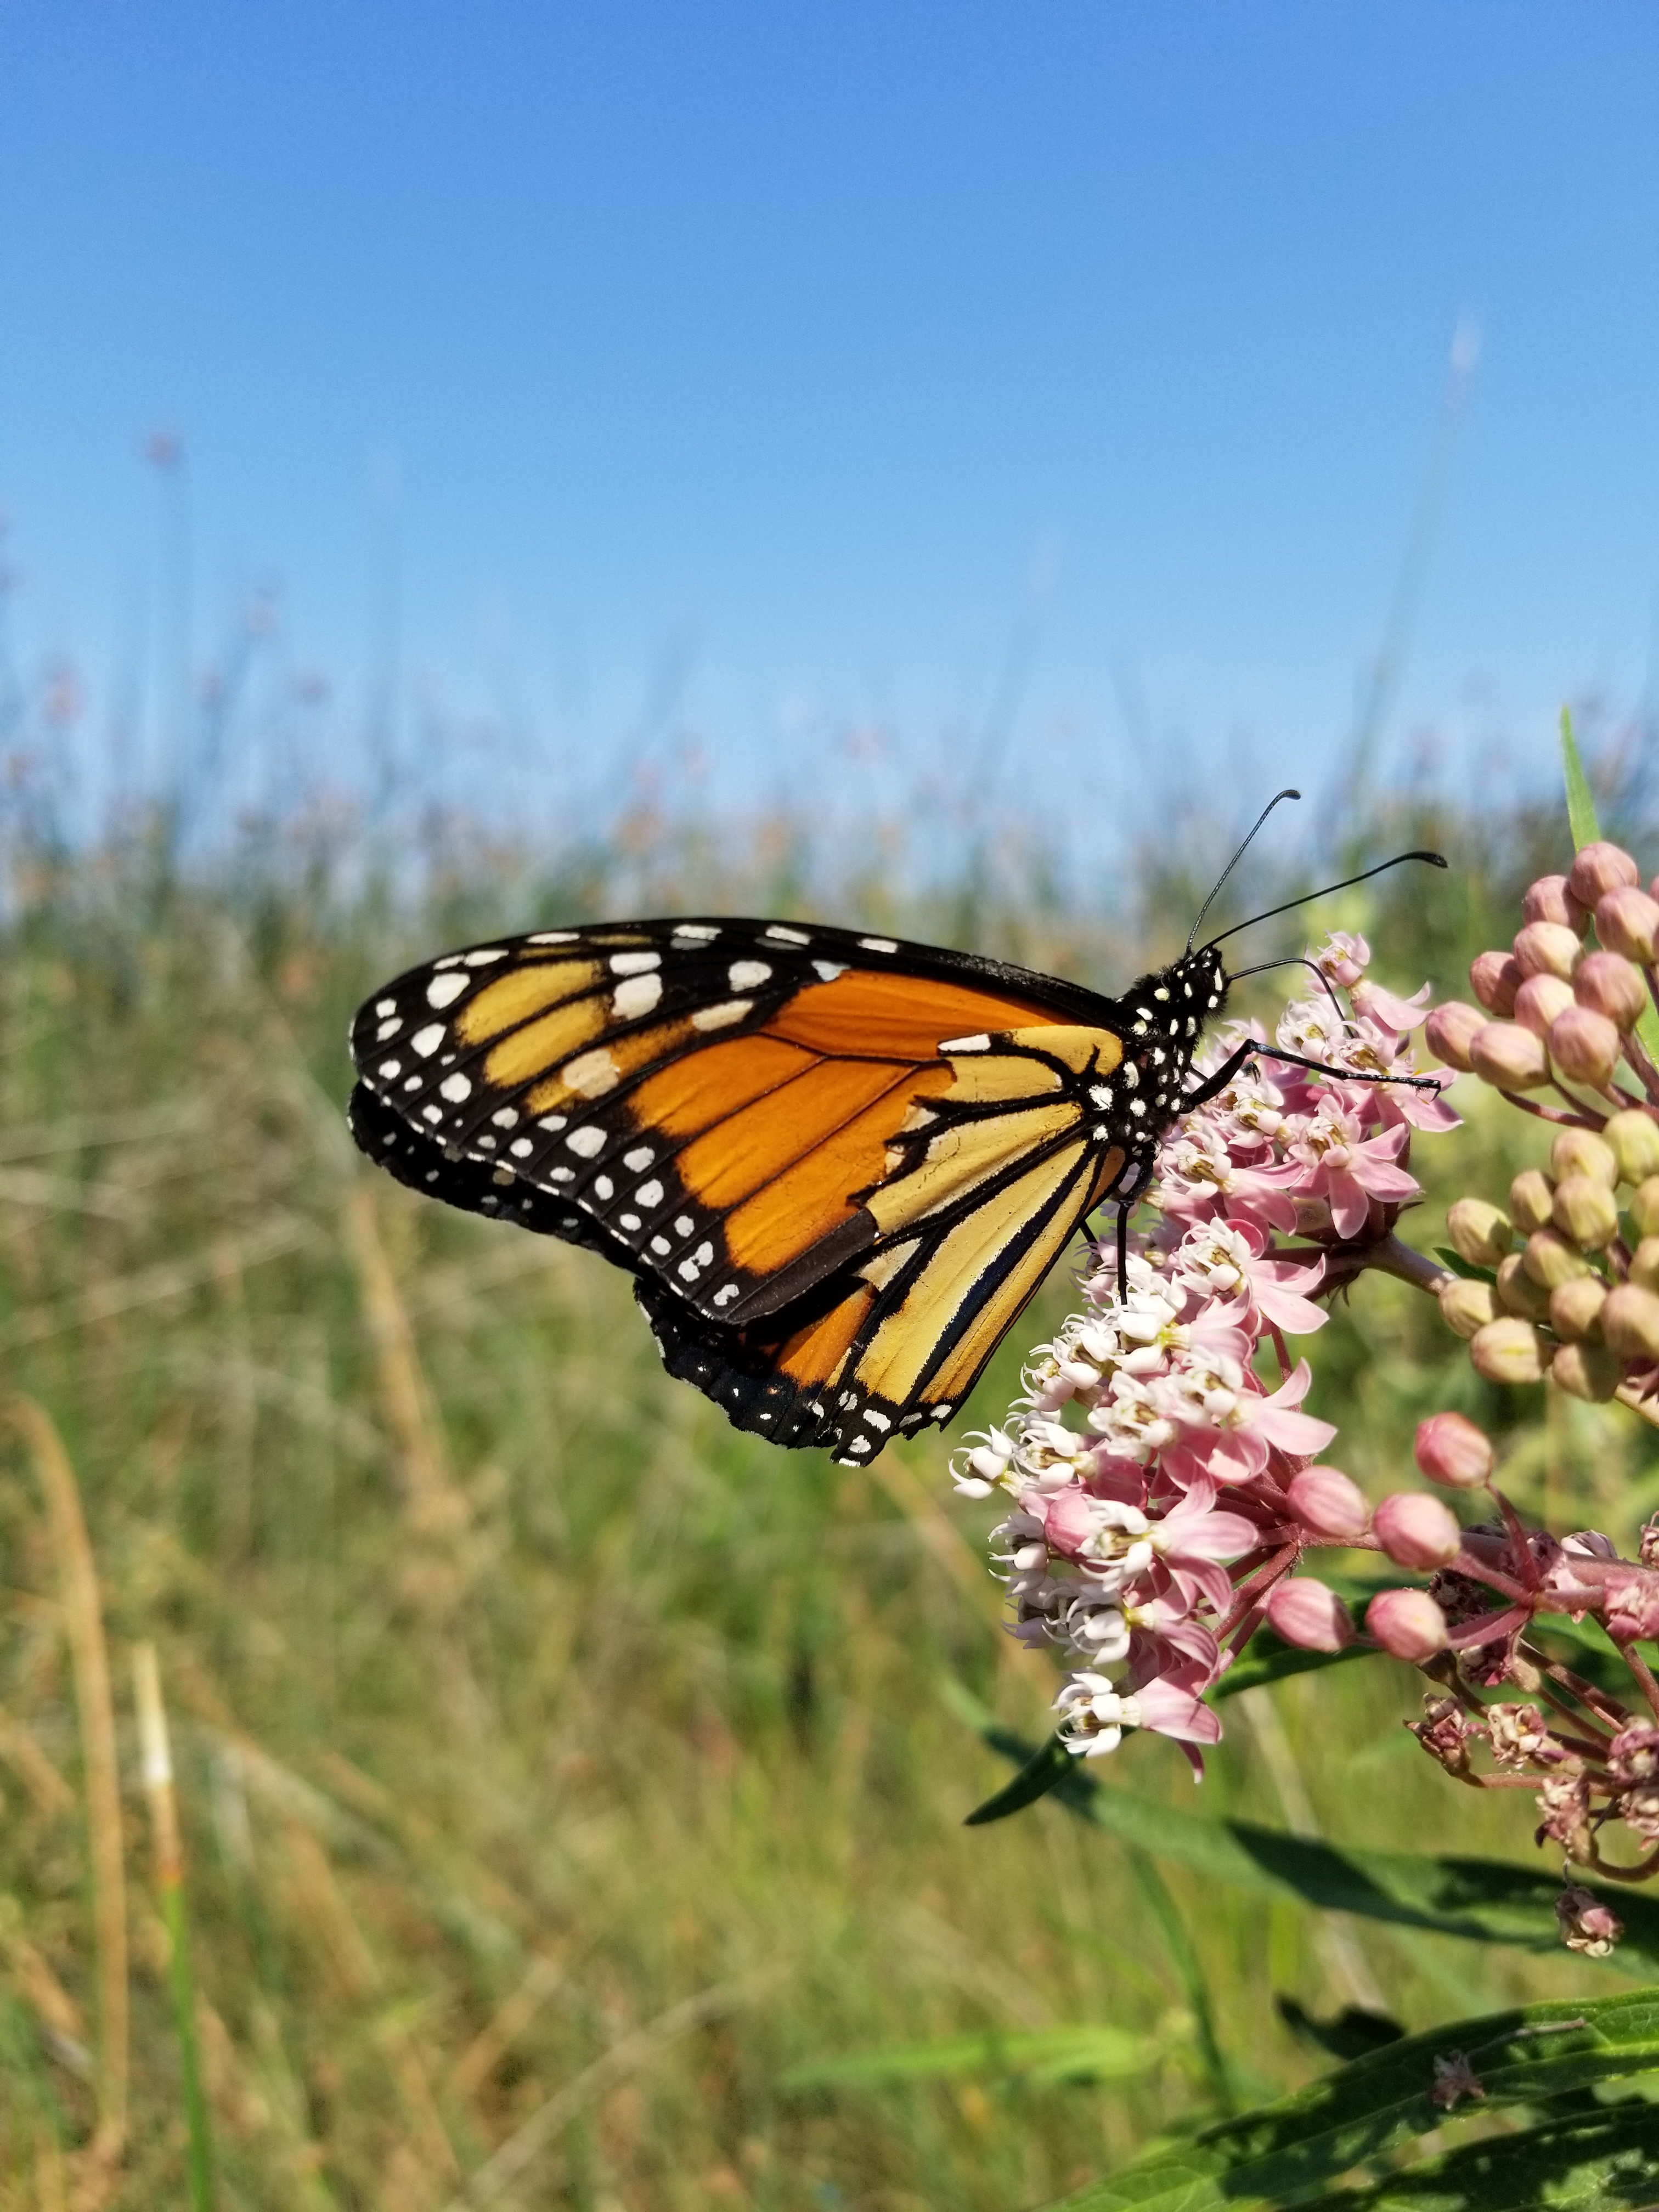 A bright orange monarch with a torn wing clings to bright pink milkweed blooms in a grassy landscape.